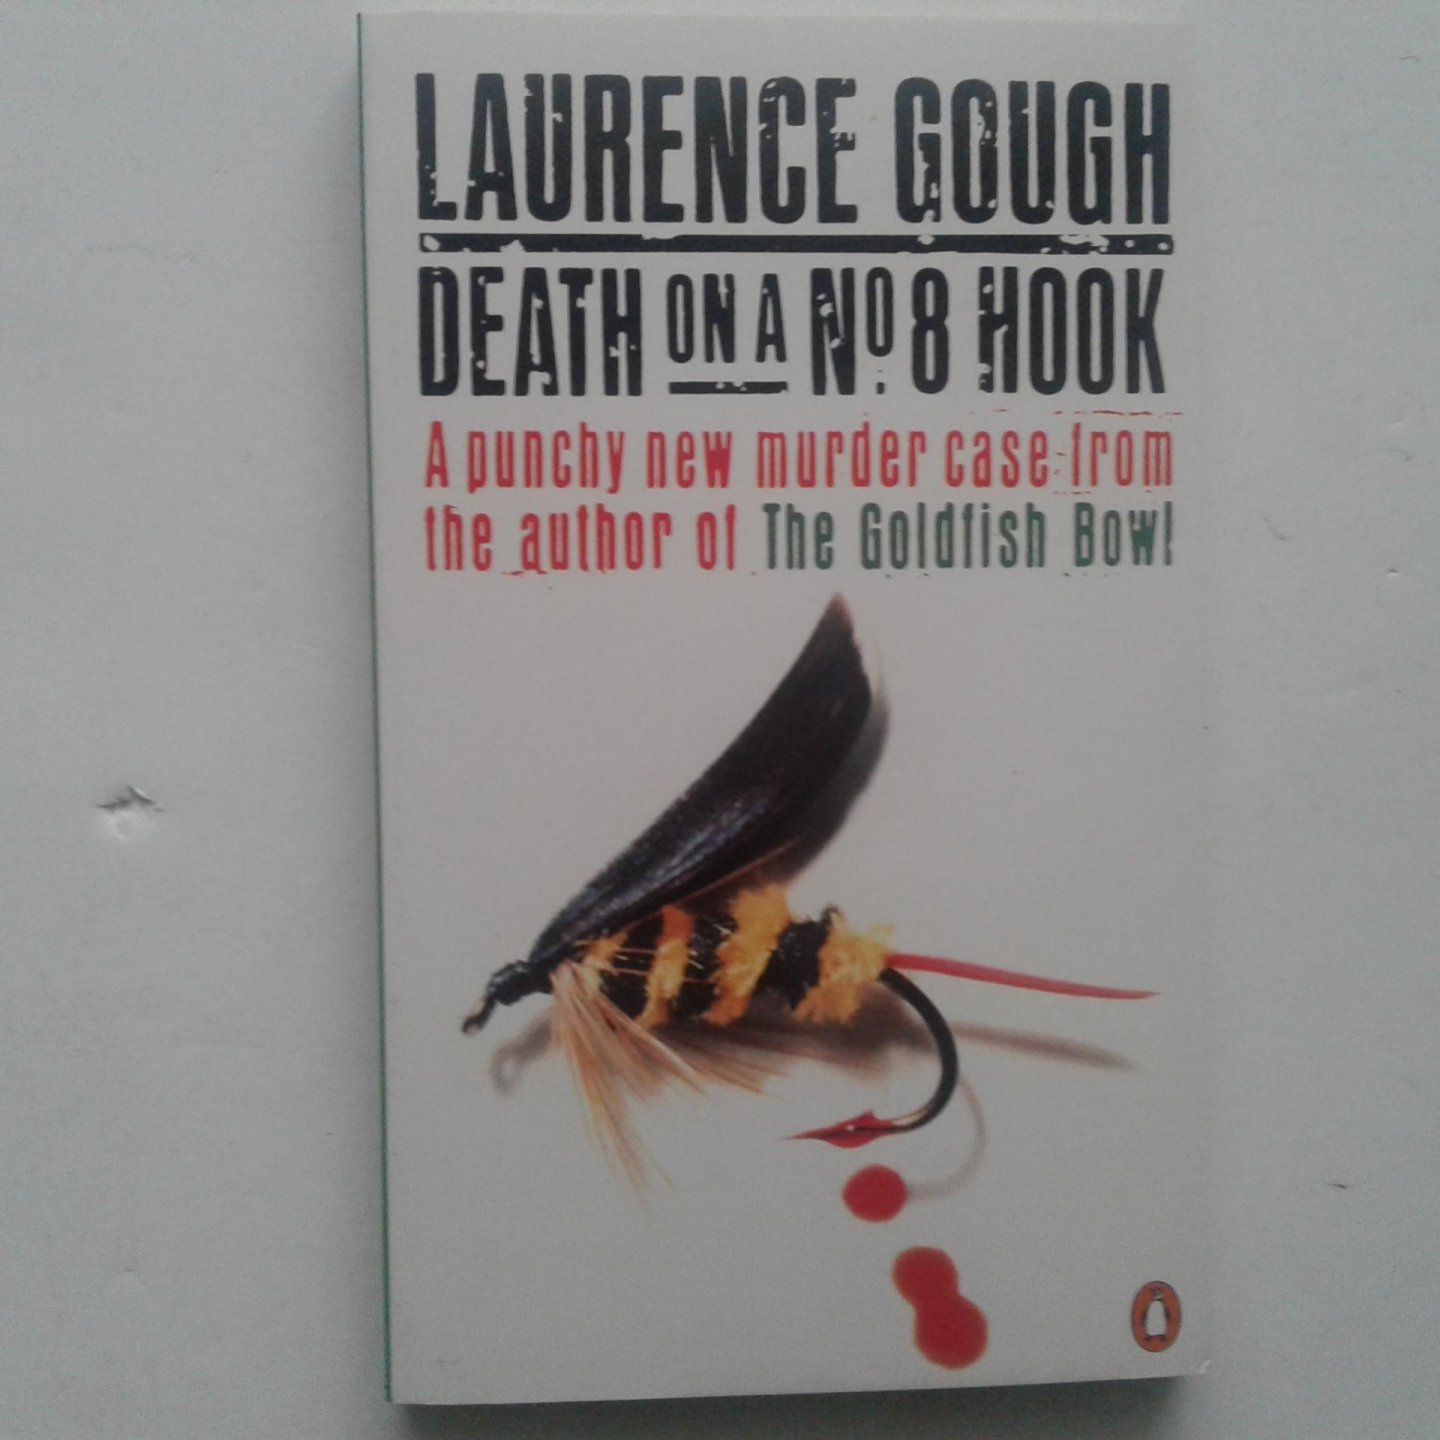 Gough, Laurence - Death on a No. 8 Hook